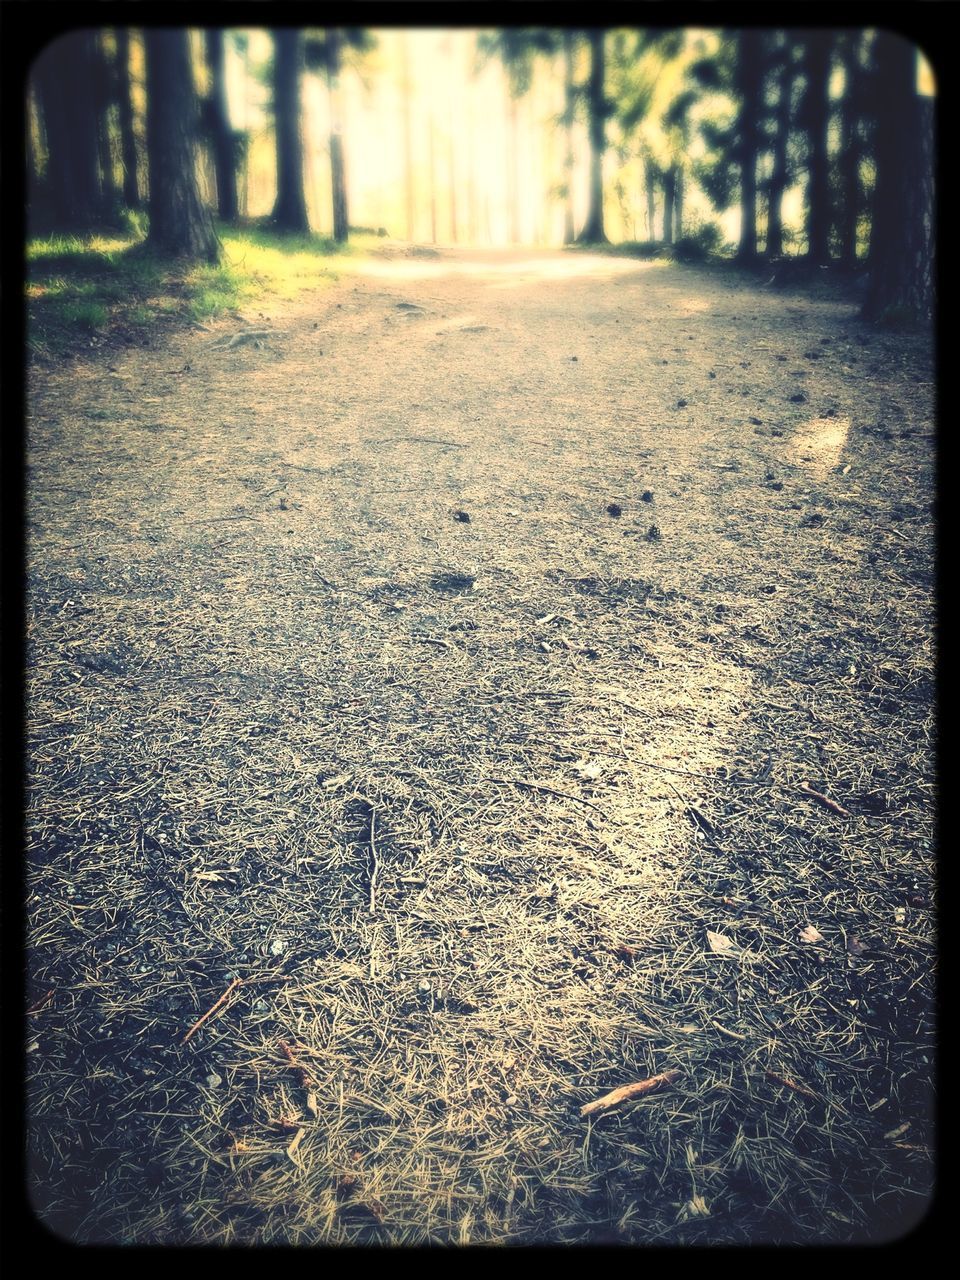 transfer print, auto post production filter, surface level, asphalt, road, the way forward, tree, selective focus, street, transportation, diminishing perspective, textured, day, no people, nature, outdoors, tranquility, sunlight, close-up, forest